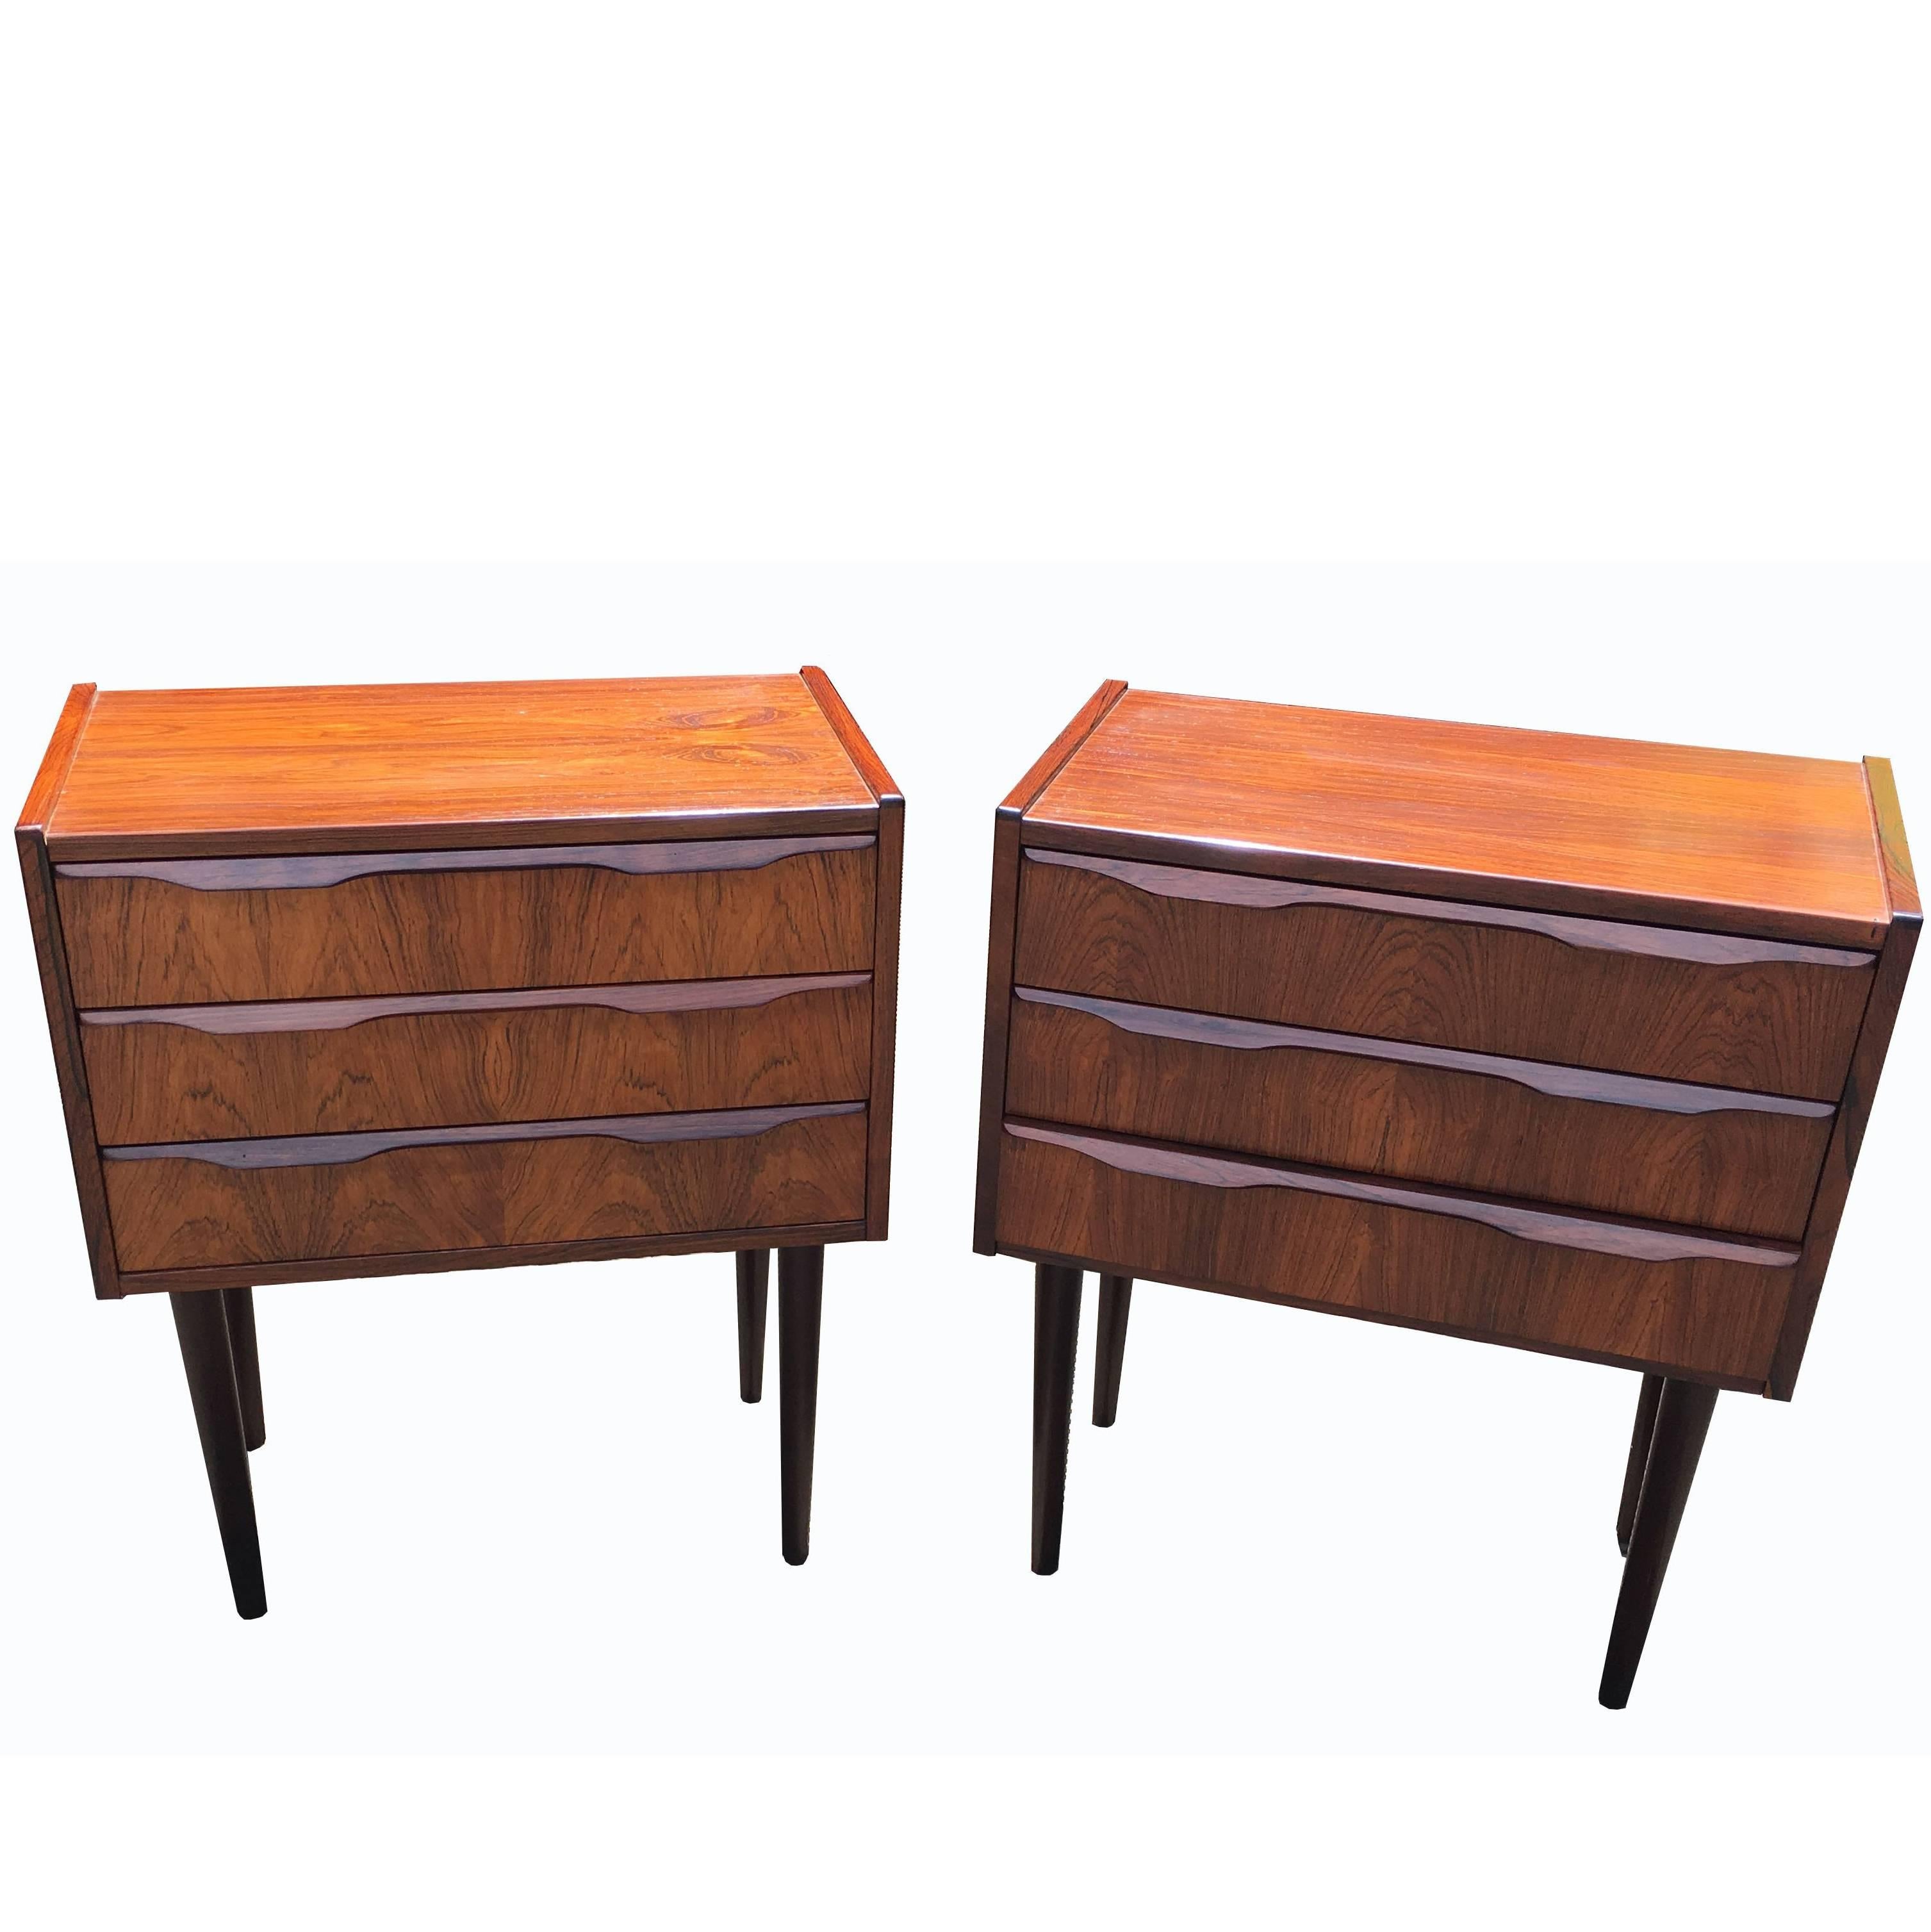 Pair of Danish Rosewood Bedside Tables